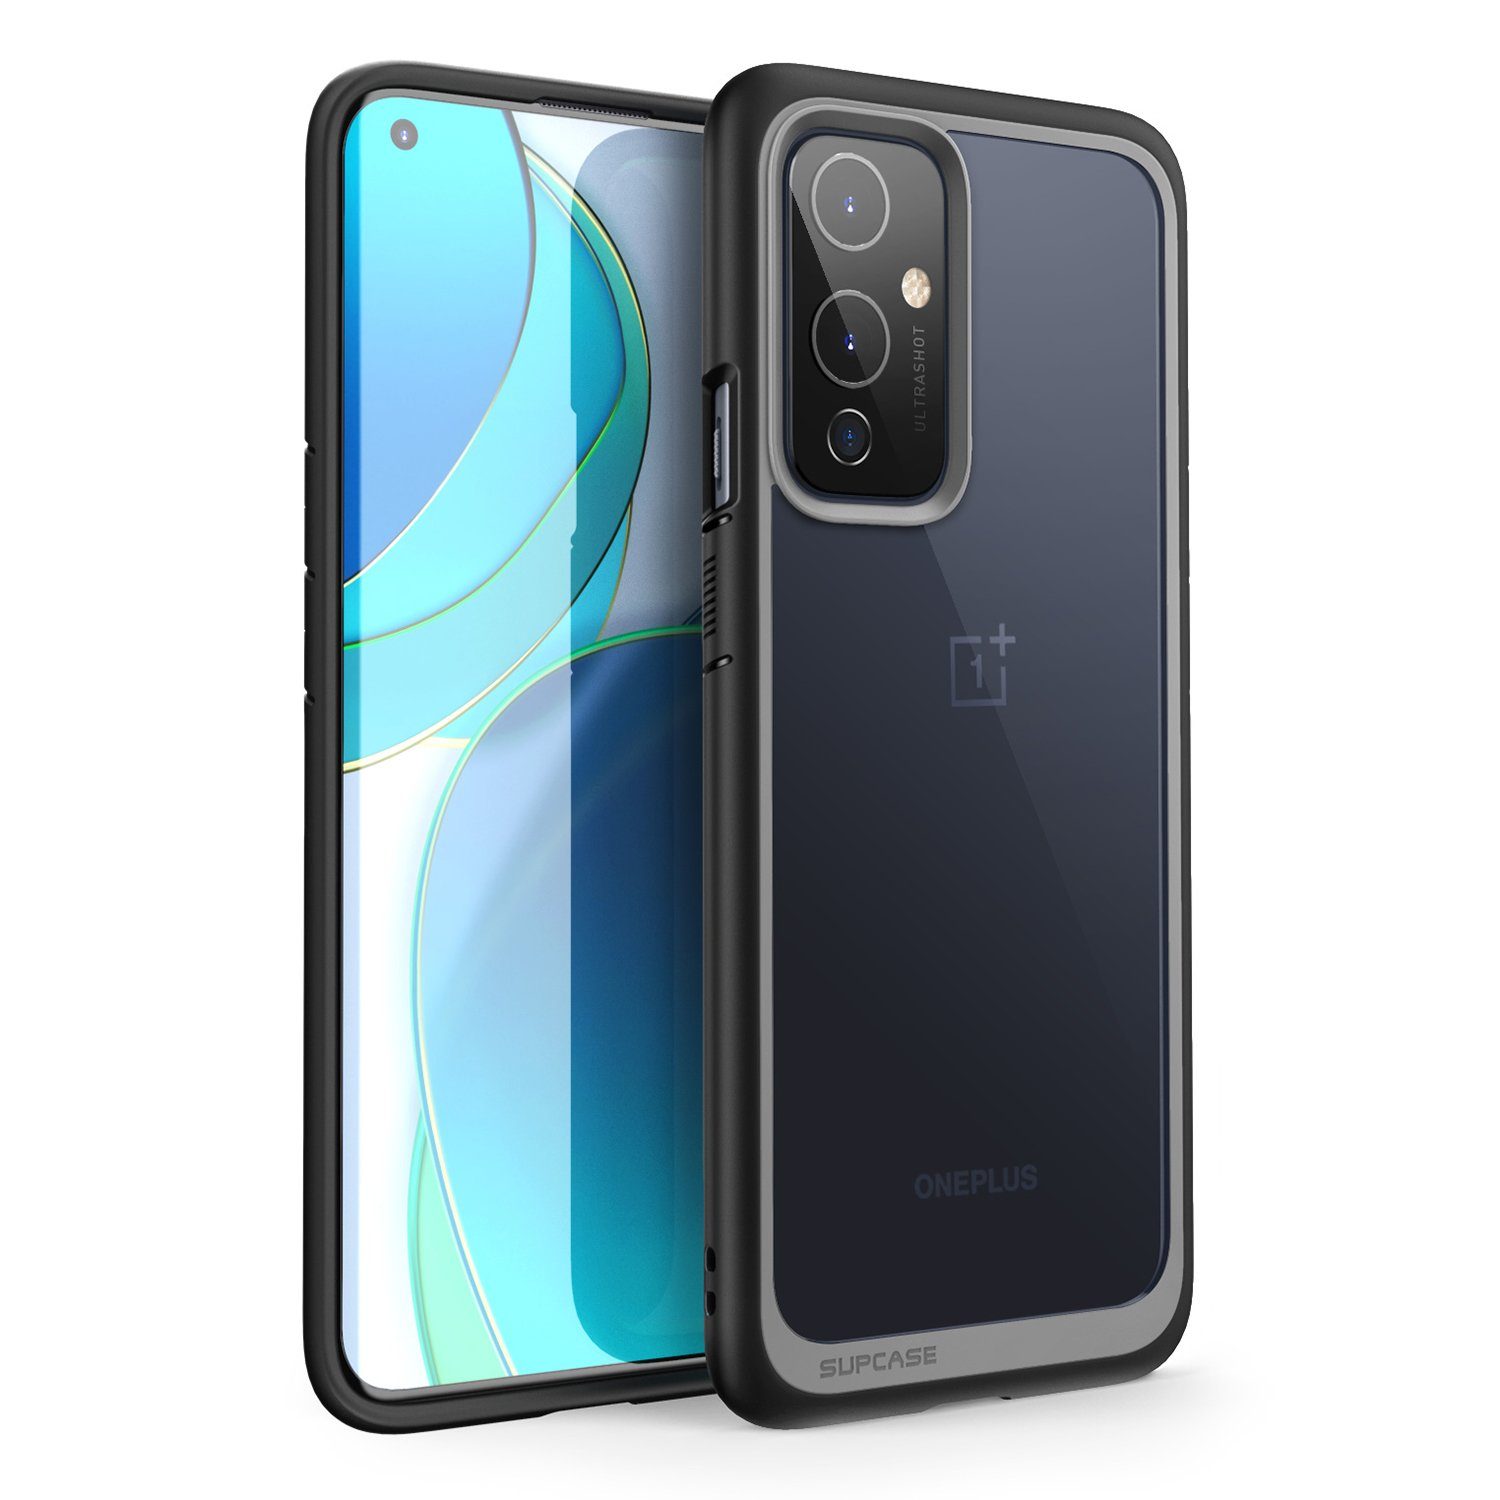 Supcase UB Style Series Hybrid Protective Clear Case for OnePlus 9 Pro, Black Default Supcase Default 